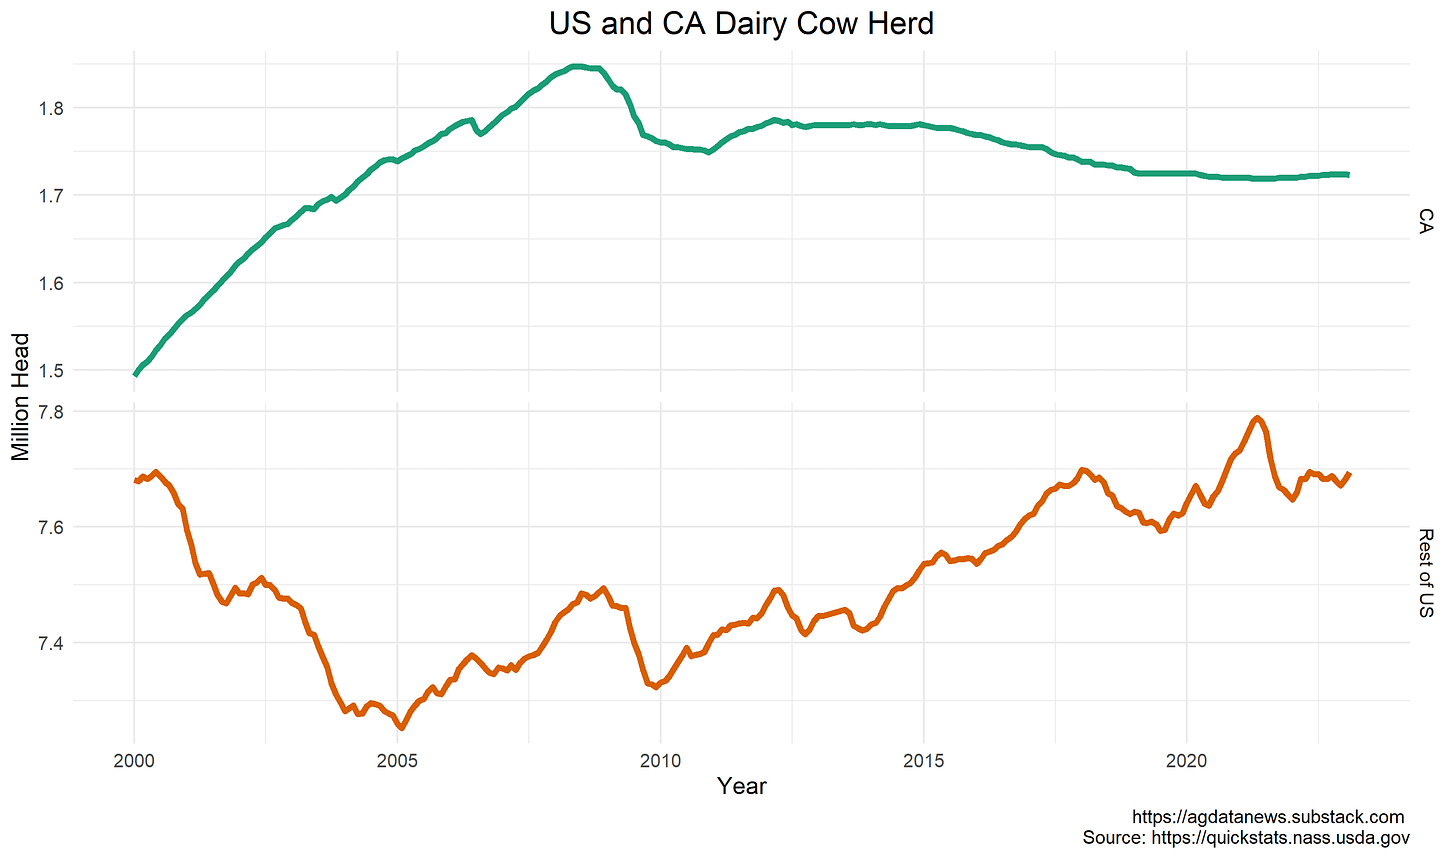 CA and US Dairy Cows